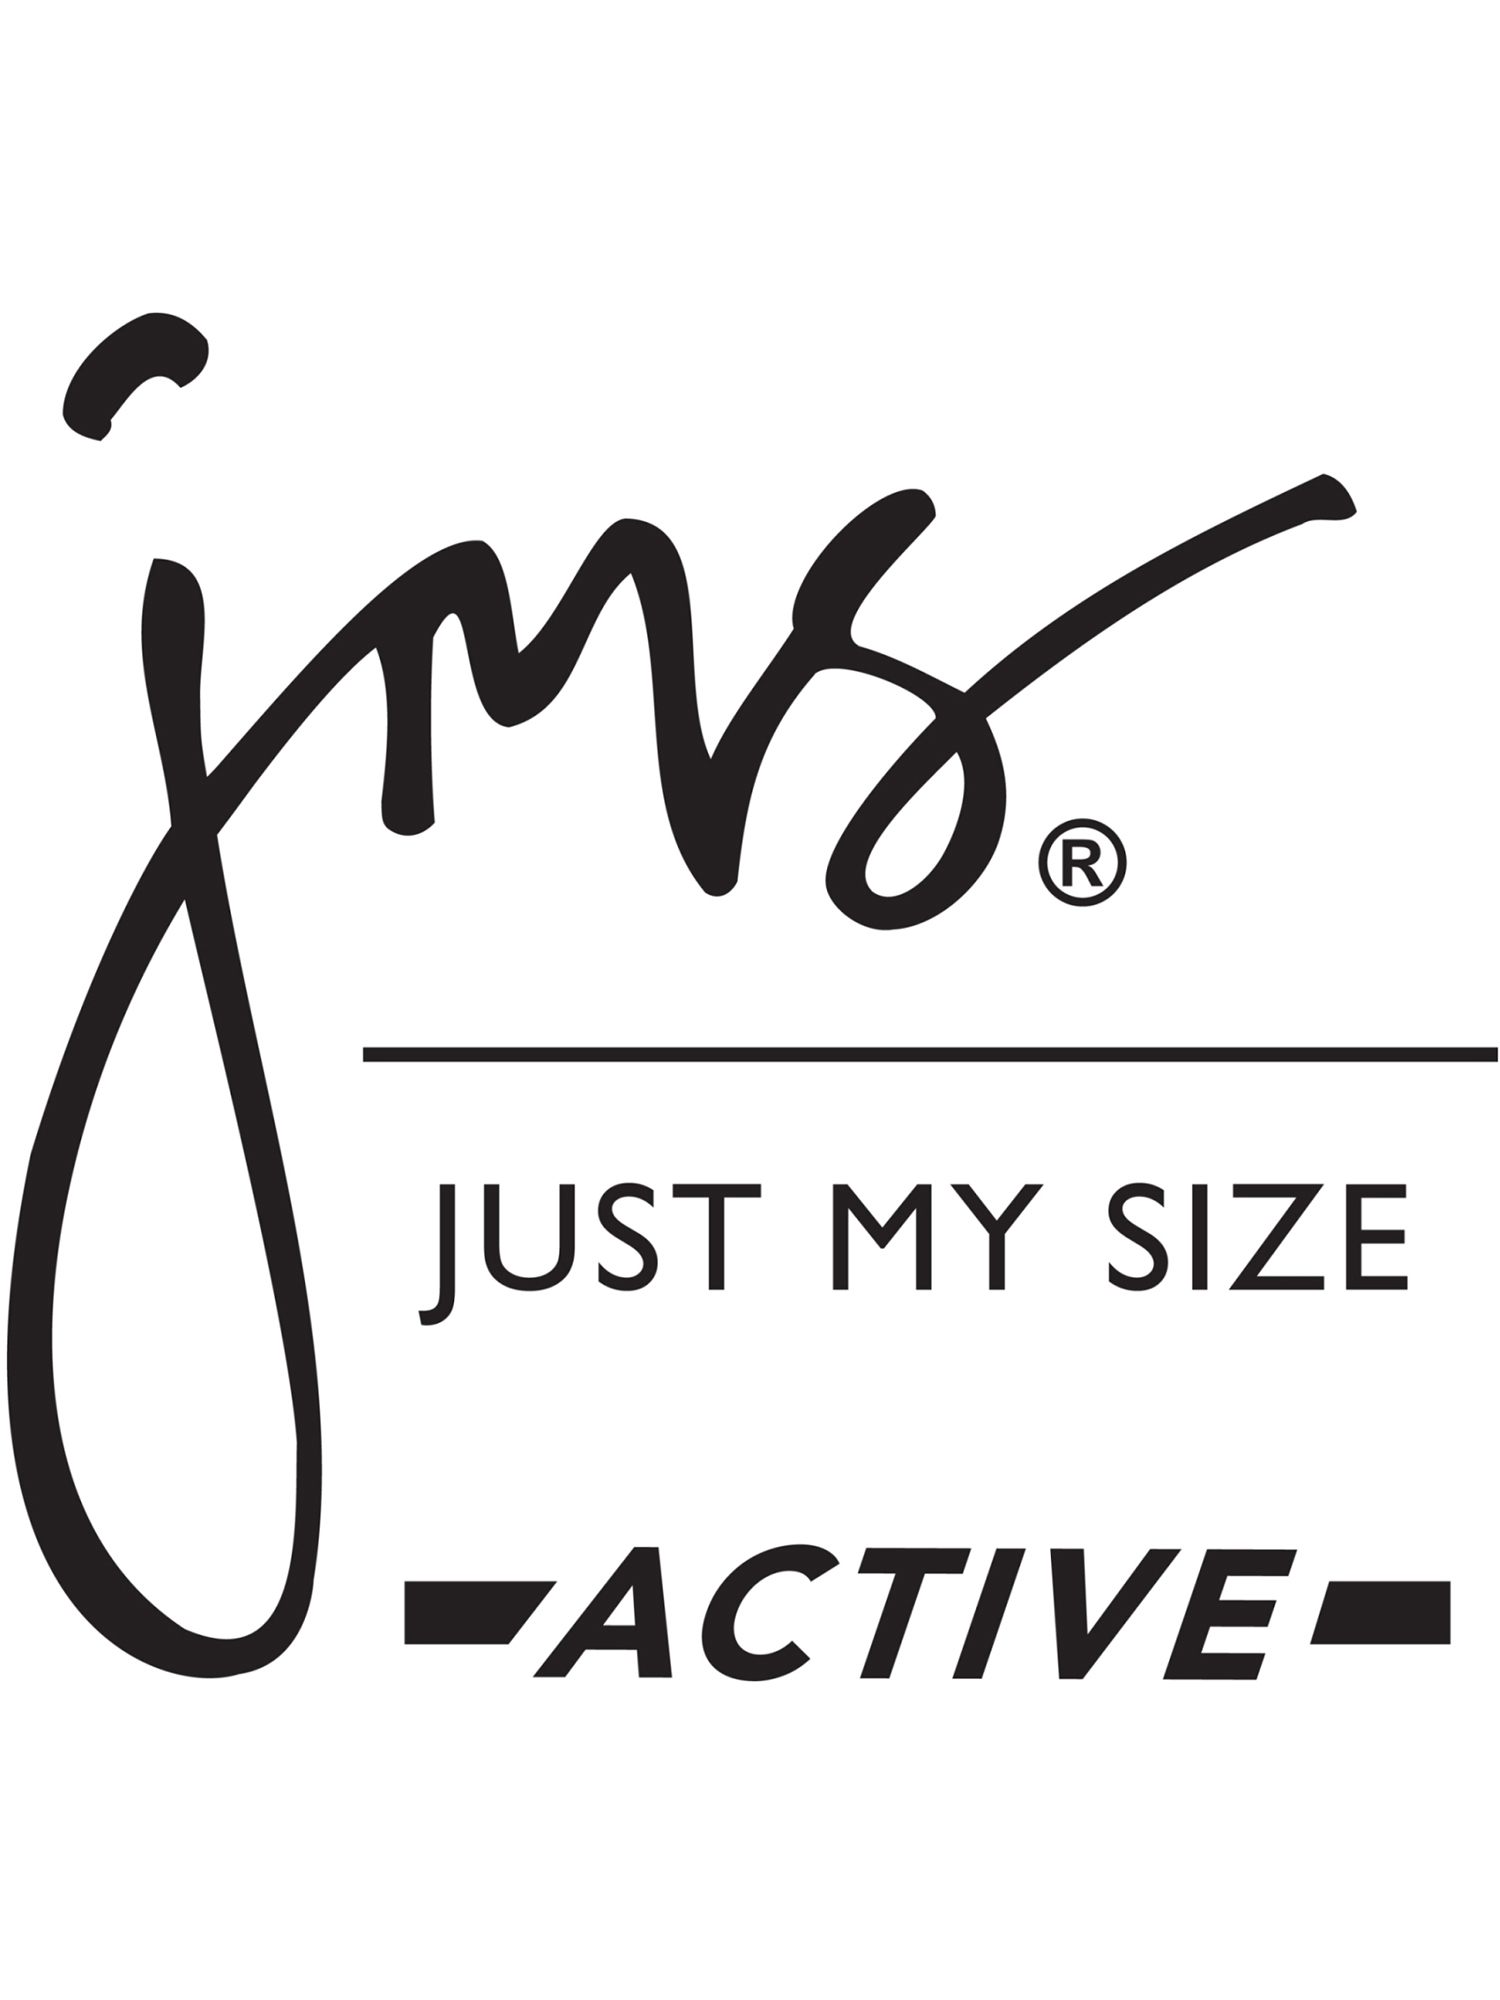 JMS by Hanes Women's Plus Size Stretch Jersey Legging - image 2 of 6